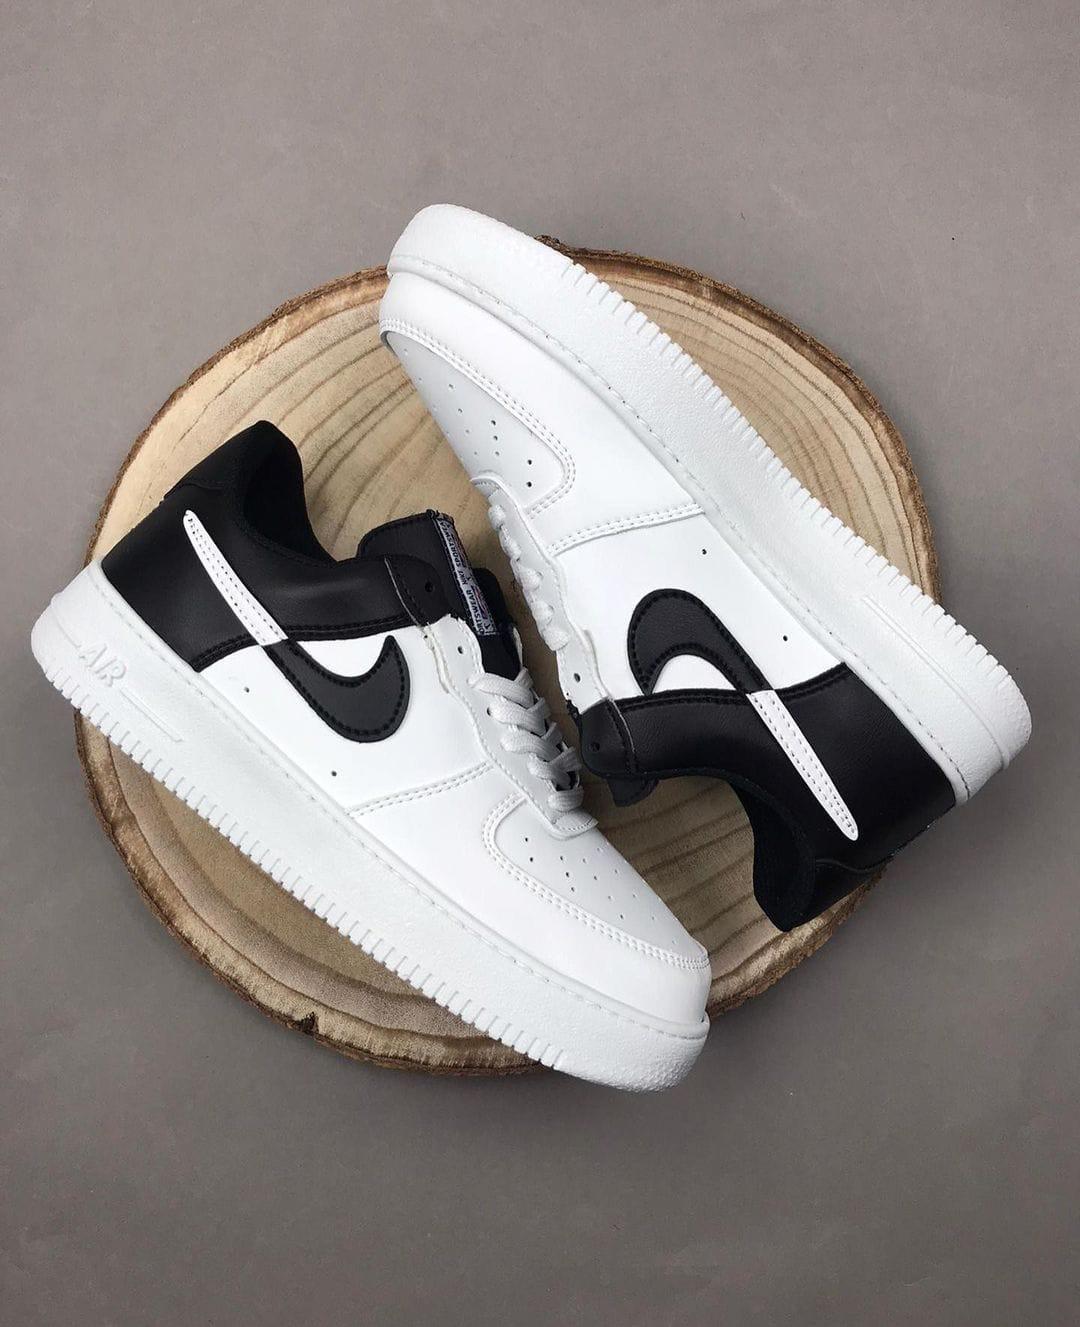 Air force 1 “White and Black”